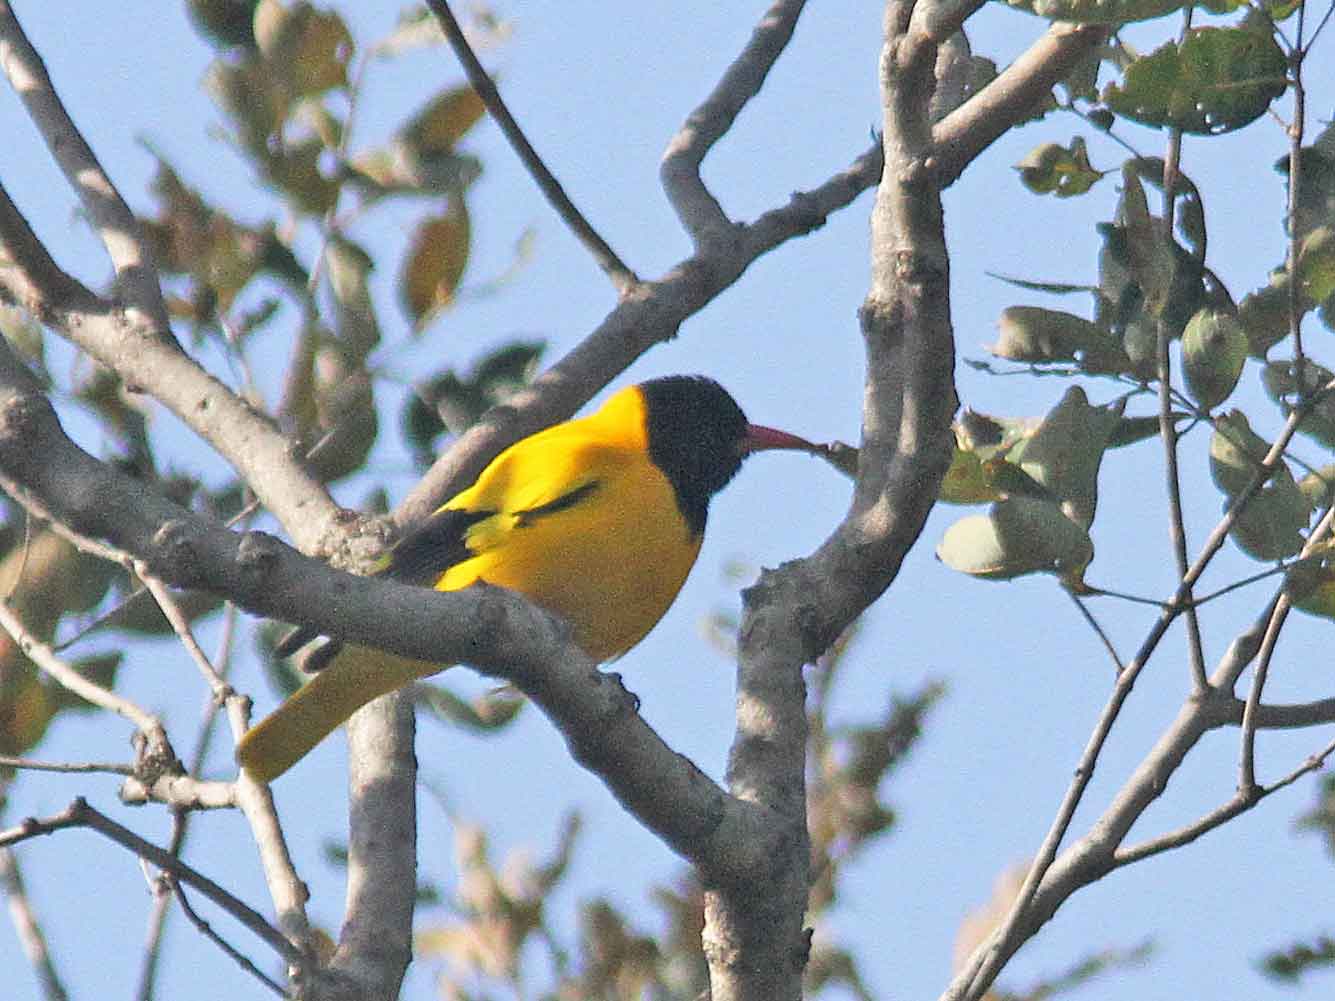 Black-hooded-Oriole.  Photo © 2010 by Alan Covert.